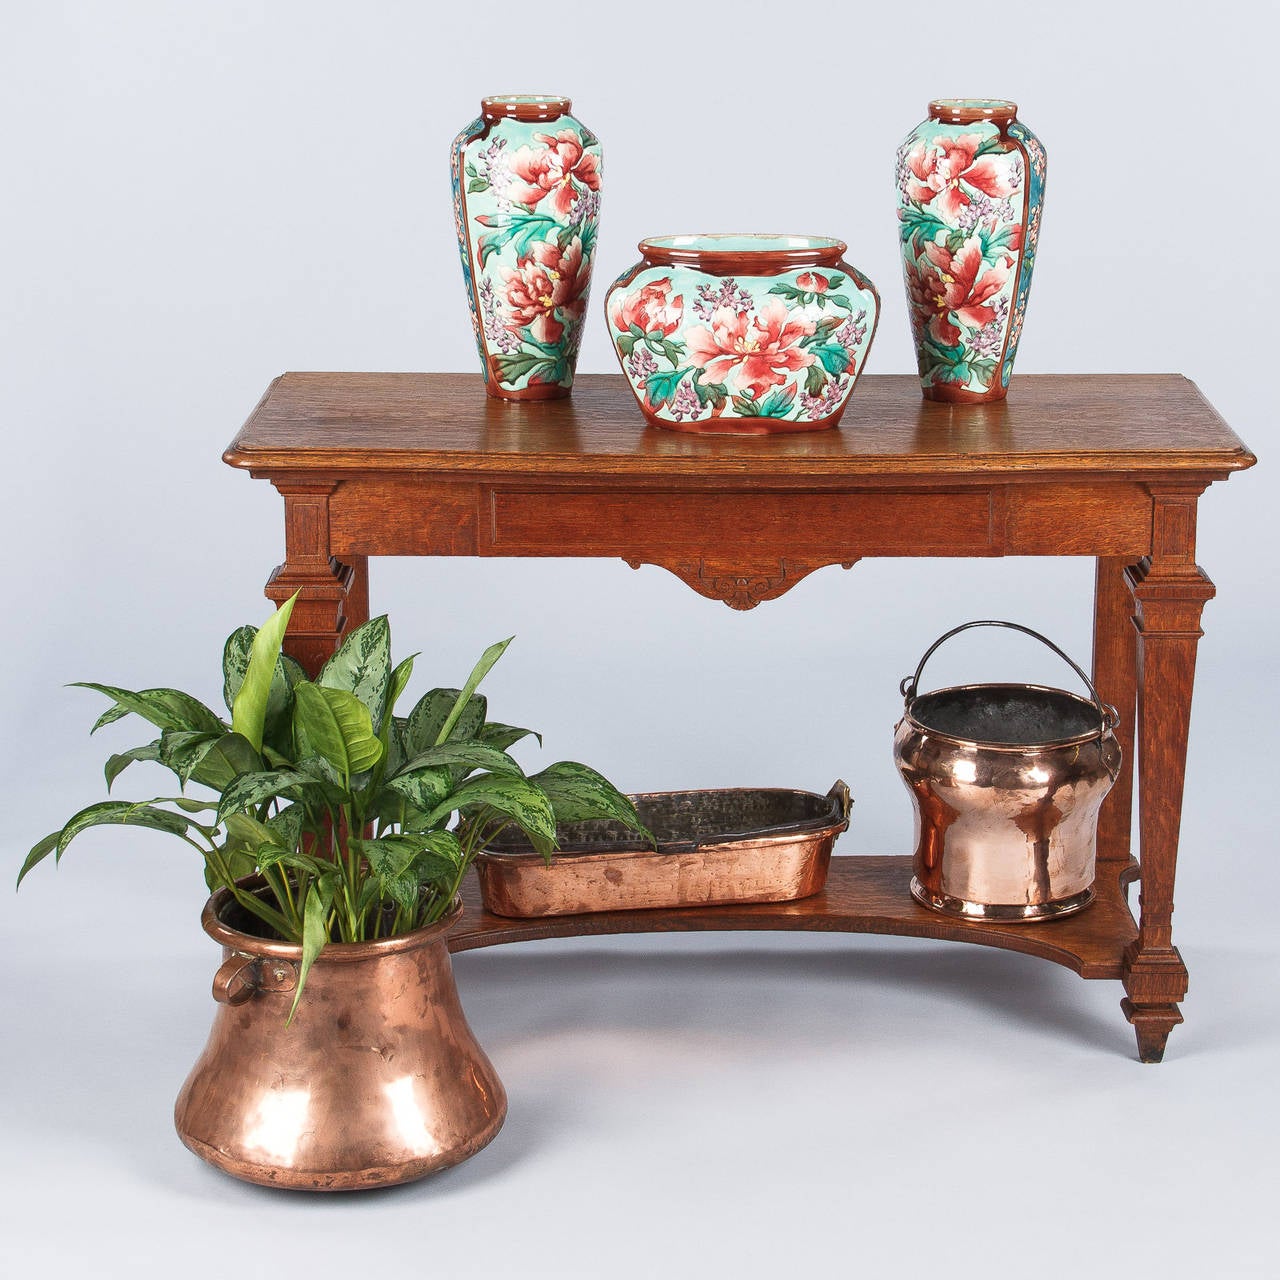 This handsome Louis XIV style console table is stamped Flachat et Cochet, Lyon and dated 1893. It is made of golden oak with baluster legs, a curved bottom shelf and a single drawer with shell and scroll motifs in the apron. From floor to bottom of